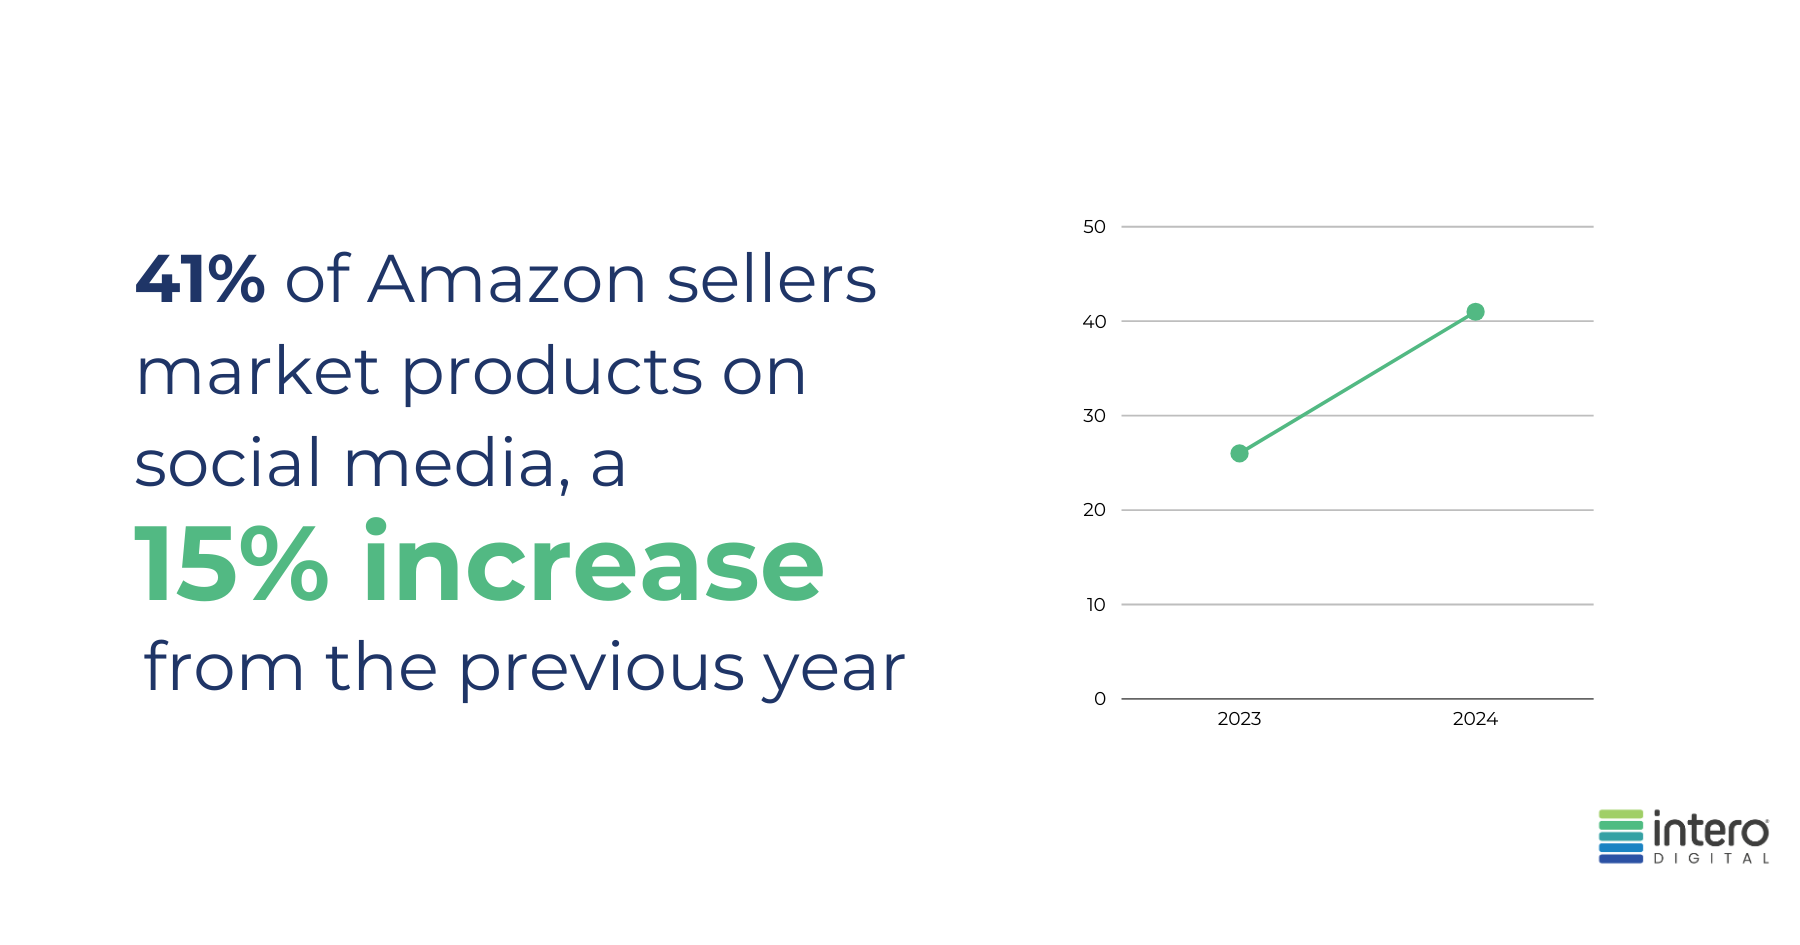 41% of Amazon sellers market products on social media, a 15% increase from the previous year